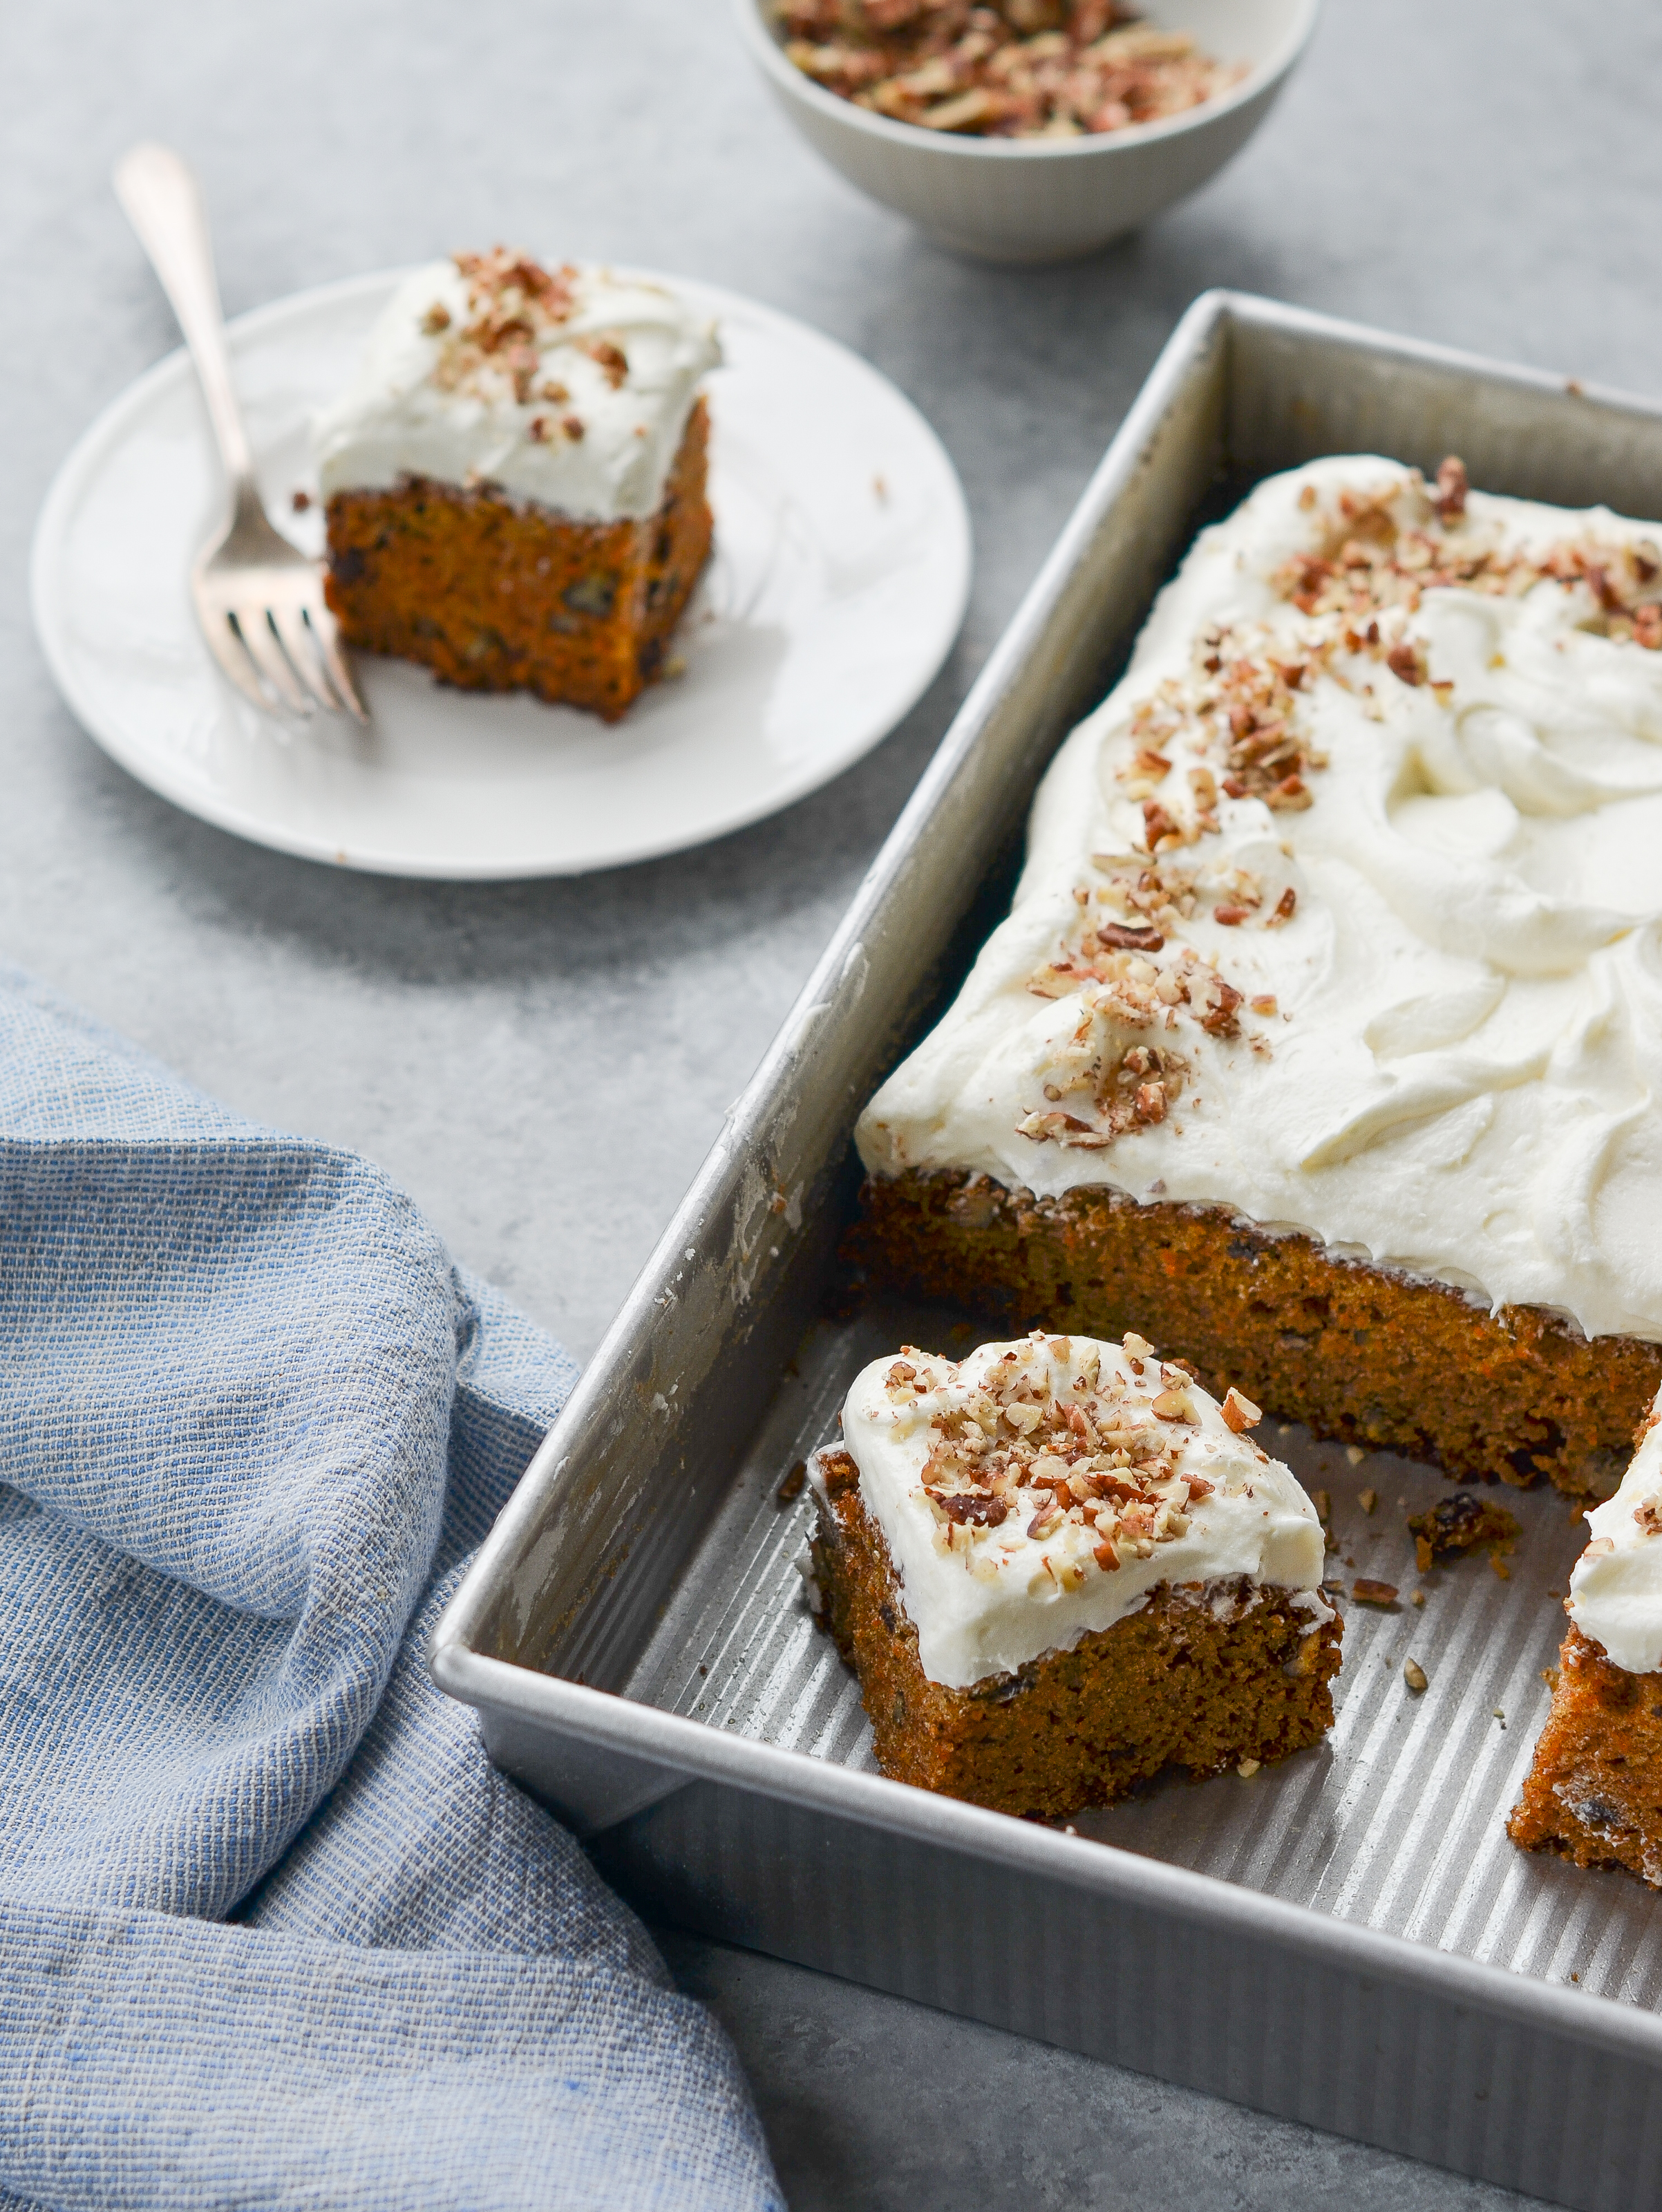 Carrot Cake With Brown Butter-Cream Cheese Frosting Recipe - The Washington  Post